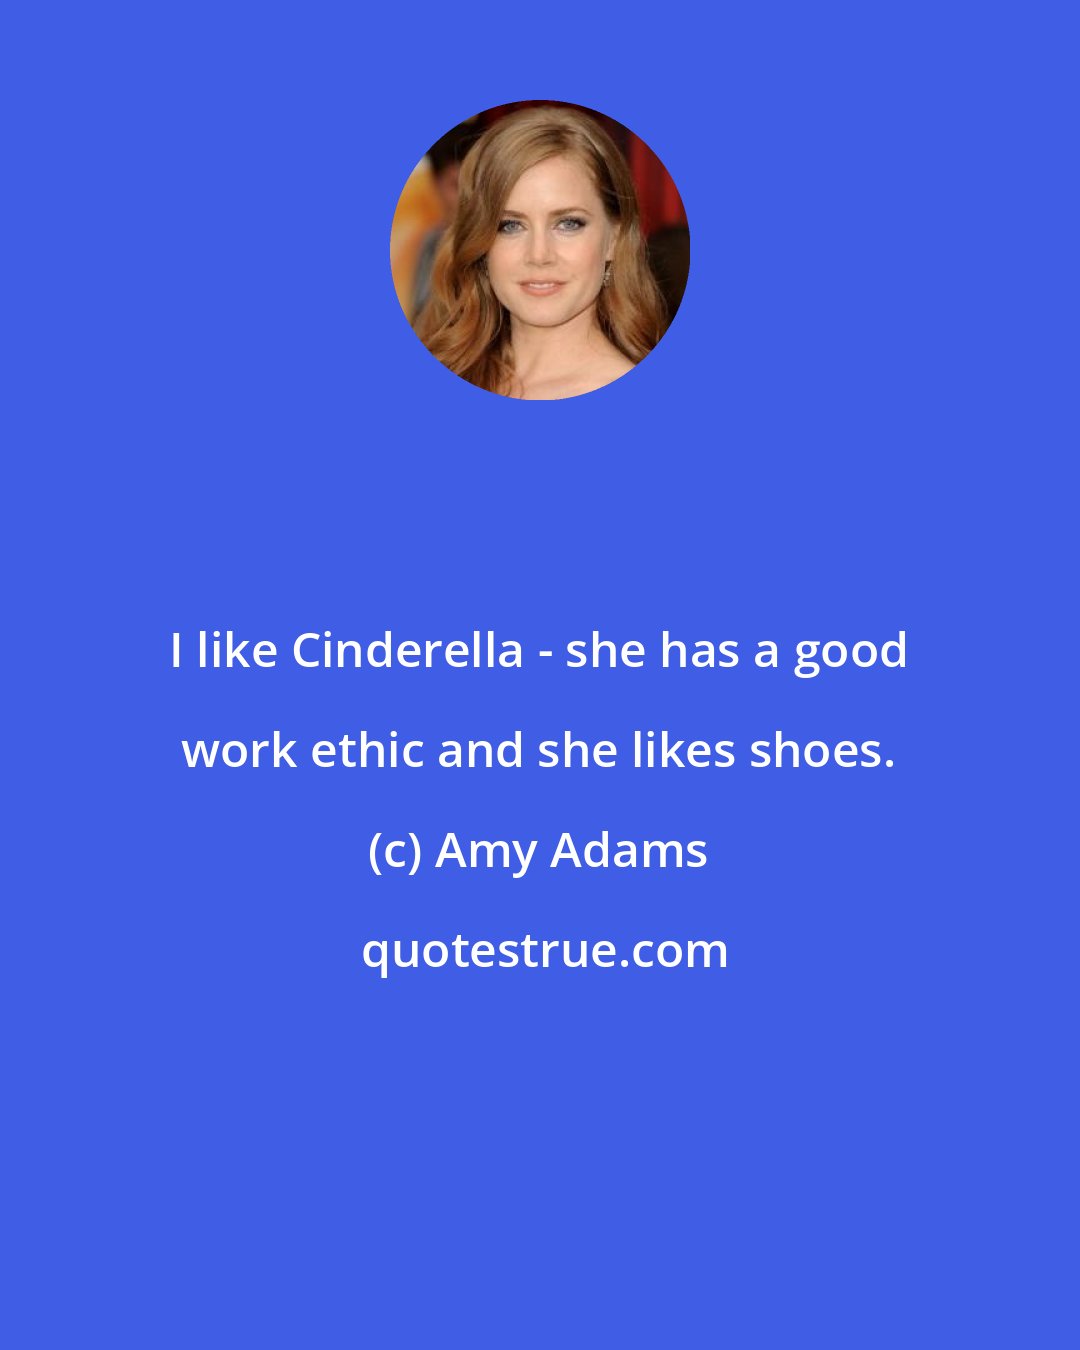 Amy Adams: I like Cinderella - she has a good work ethic and she likes shoes.